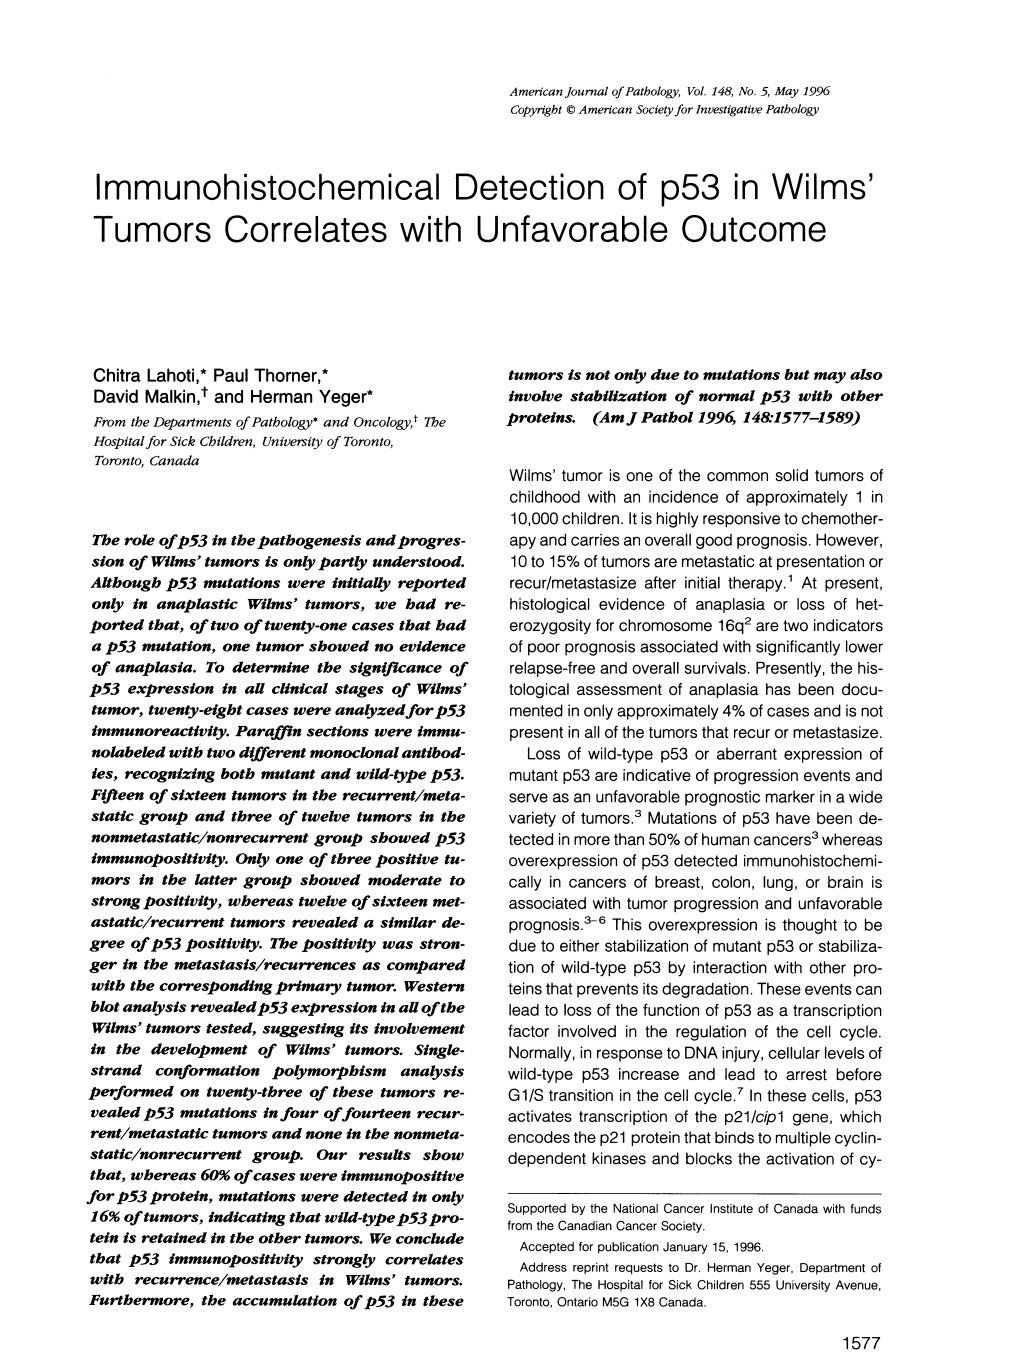 Immunohistochemical Detection of P53 in Wilms' Tumors Correlates with Unfavorable Outcome